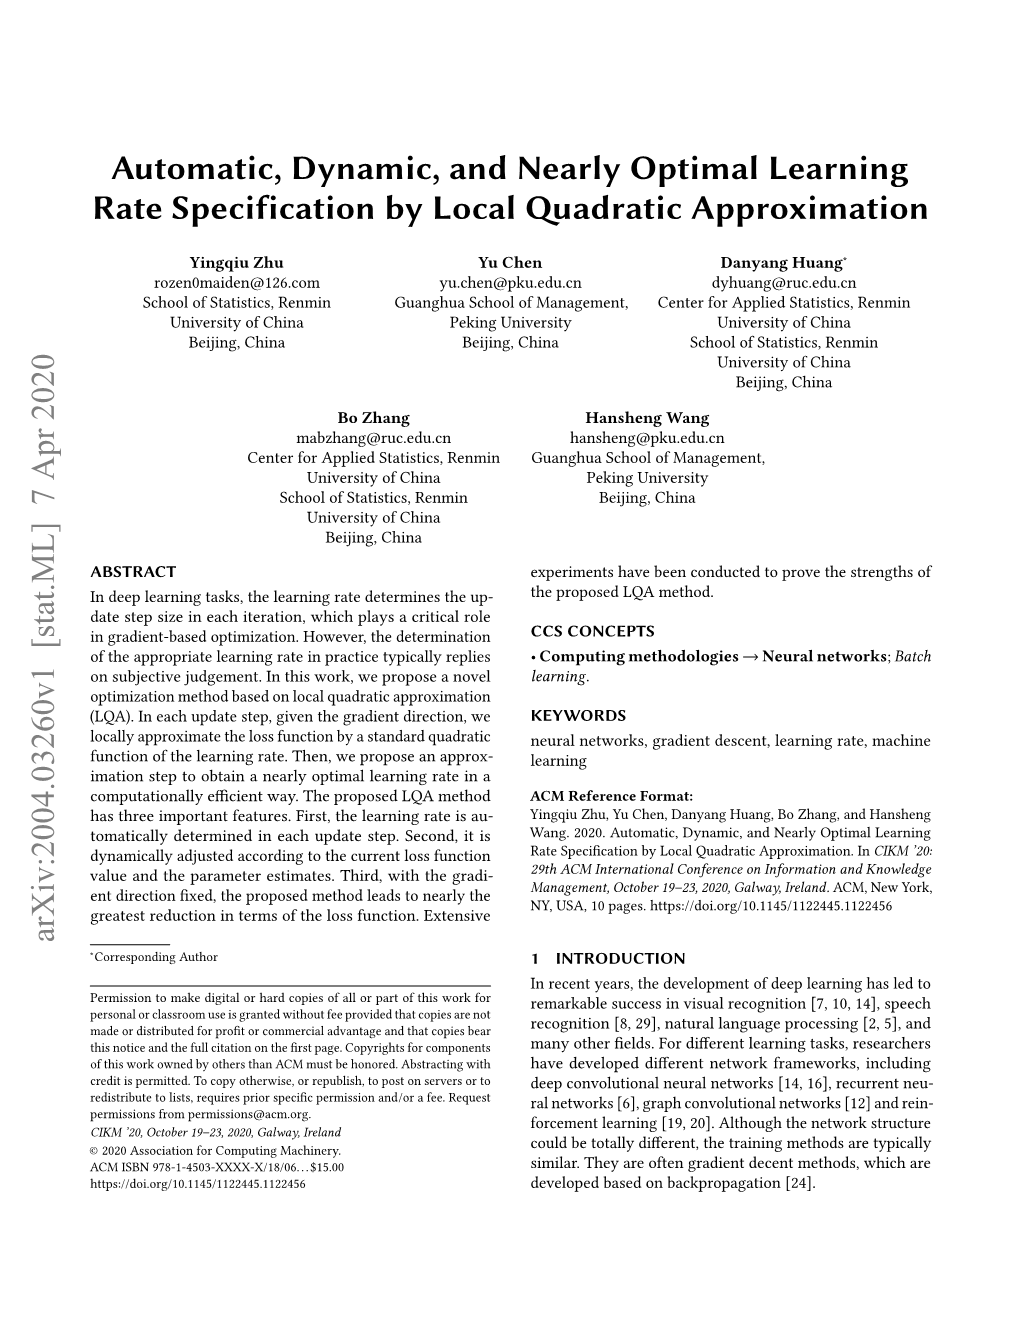 Automatic, Dynamic, and Nearly Optimal Learning Rate Specification by Local Quadratic Approximation